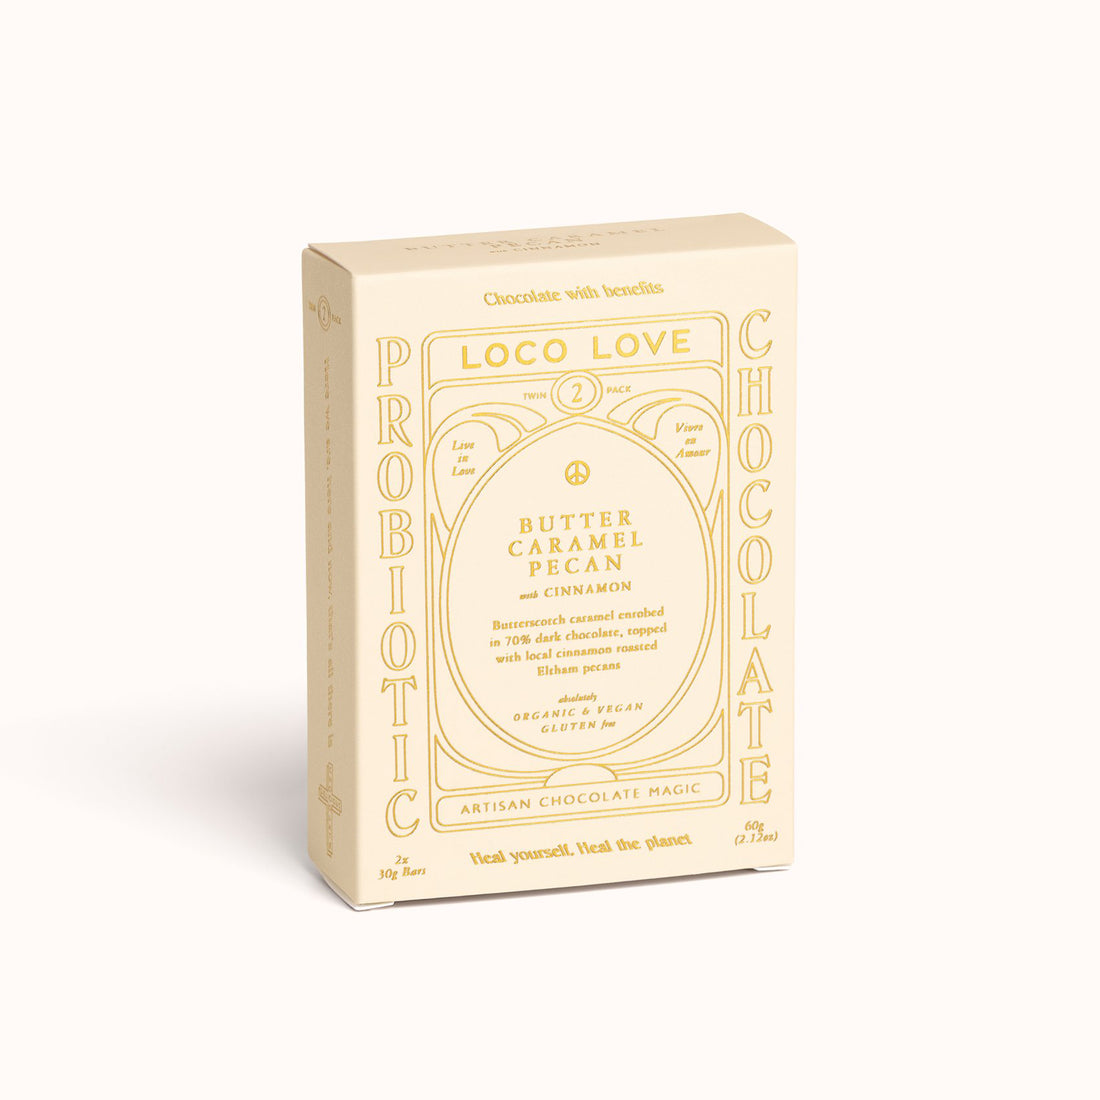 BUTTER CARAMEL PECAN CHOCOLATE BY LOCO LOVE